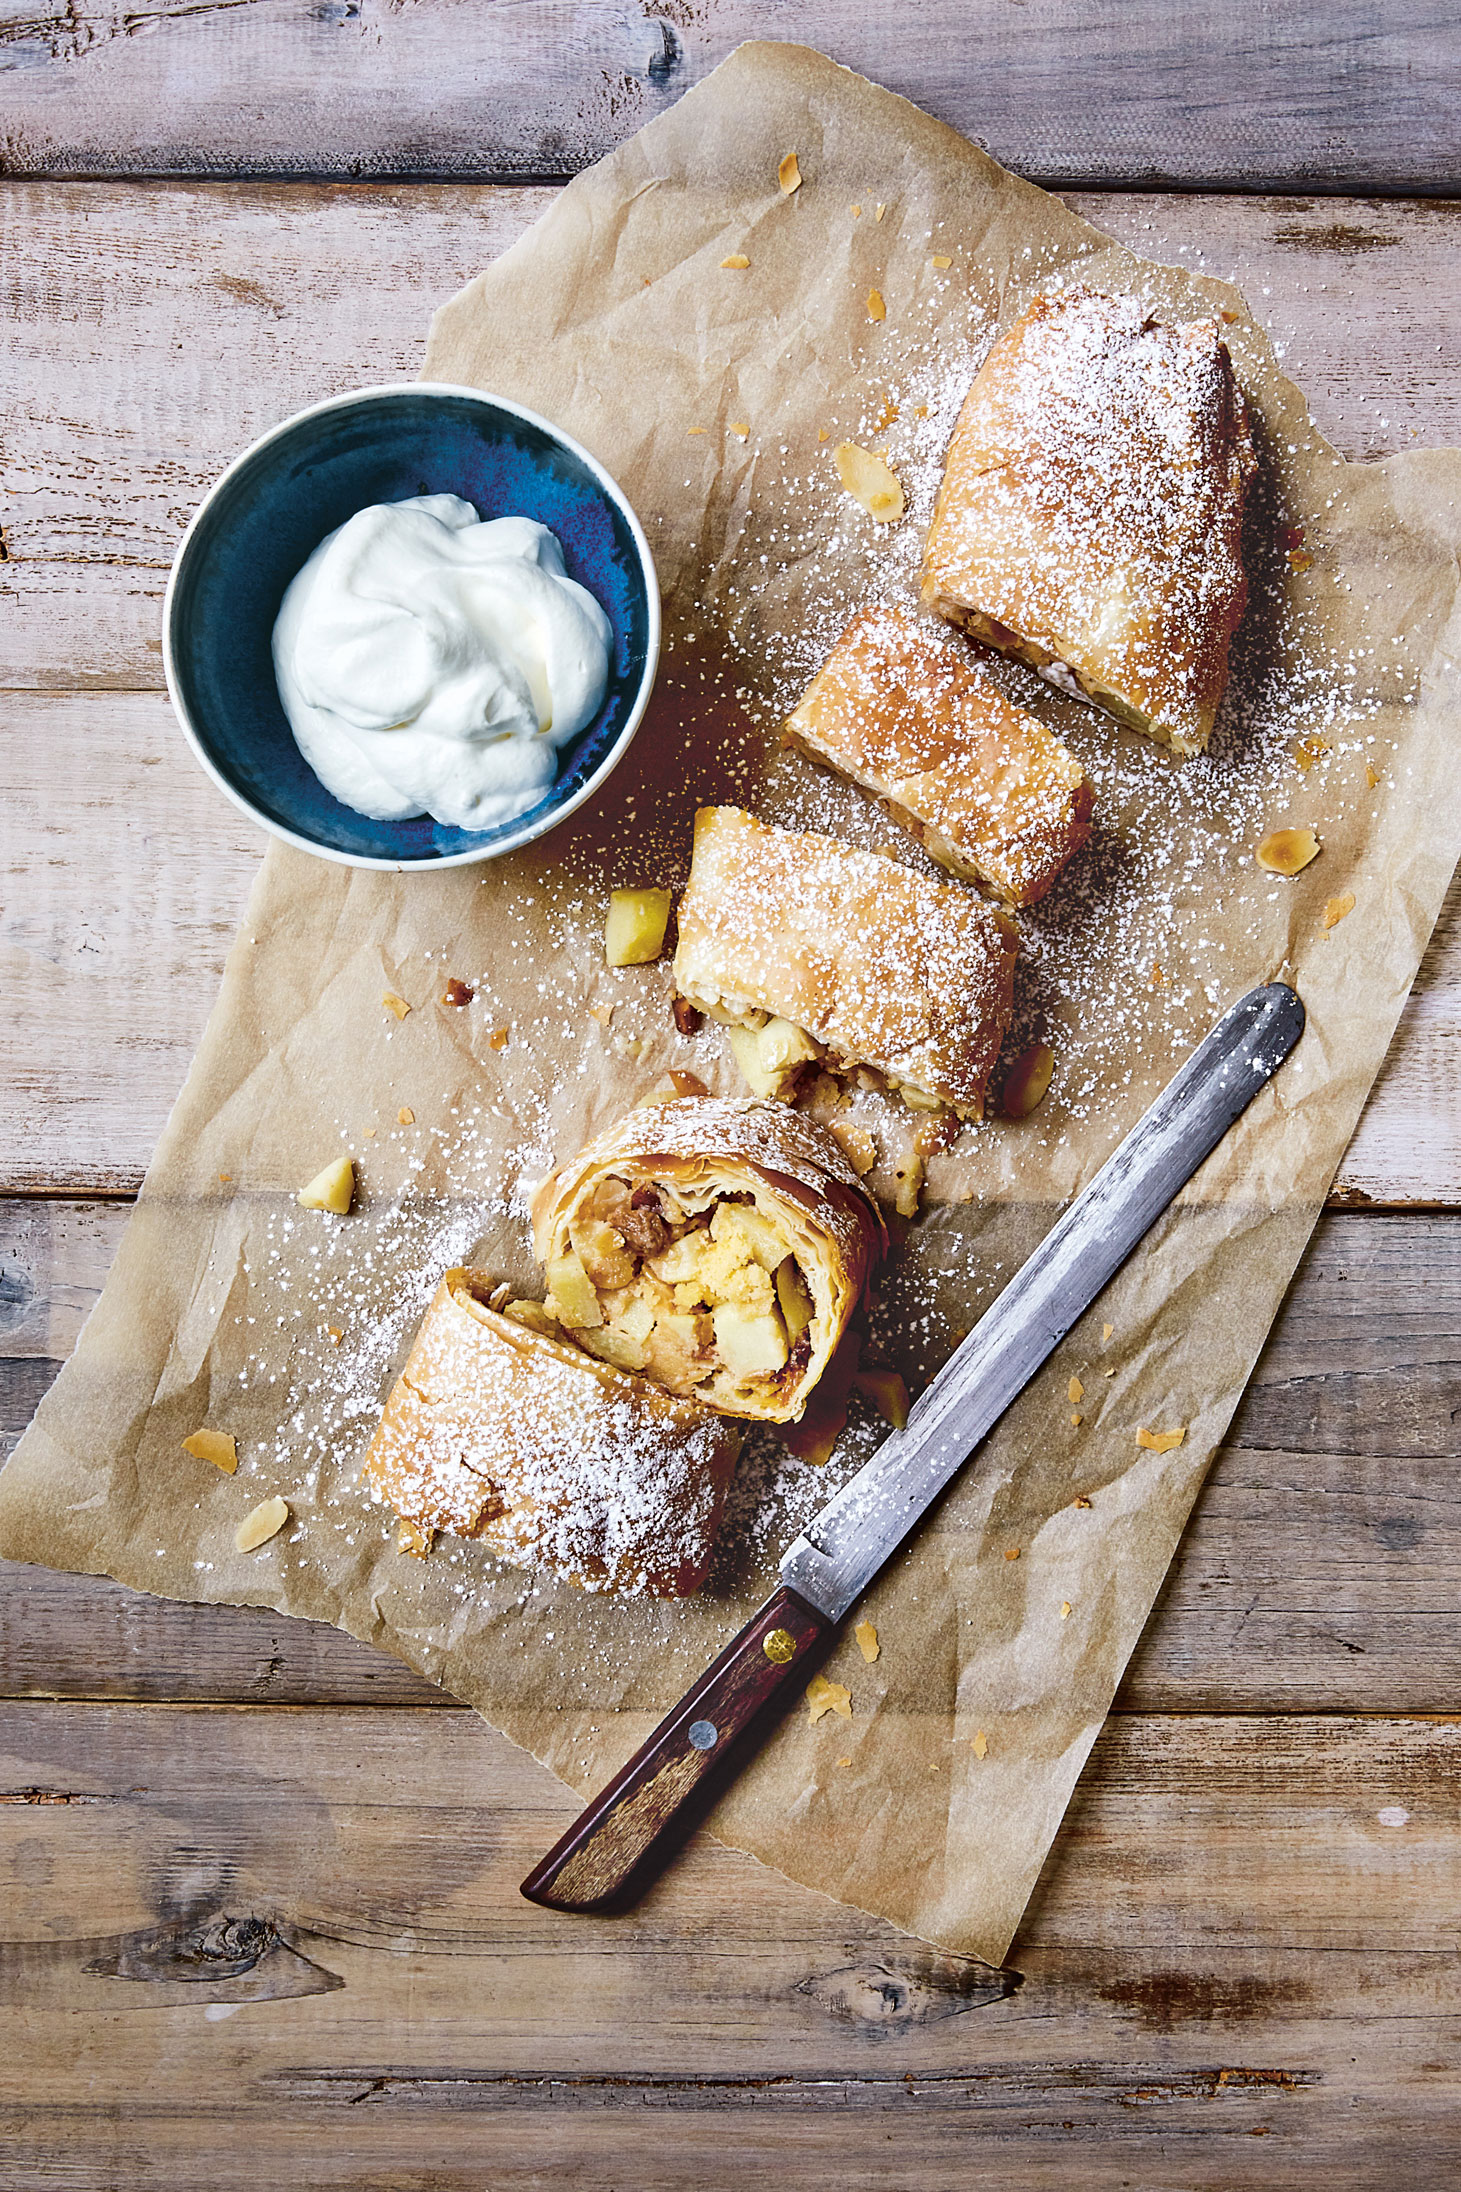 Apple Strudel. Photography by Danielle Acken from The German Cookbook